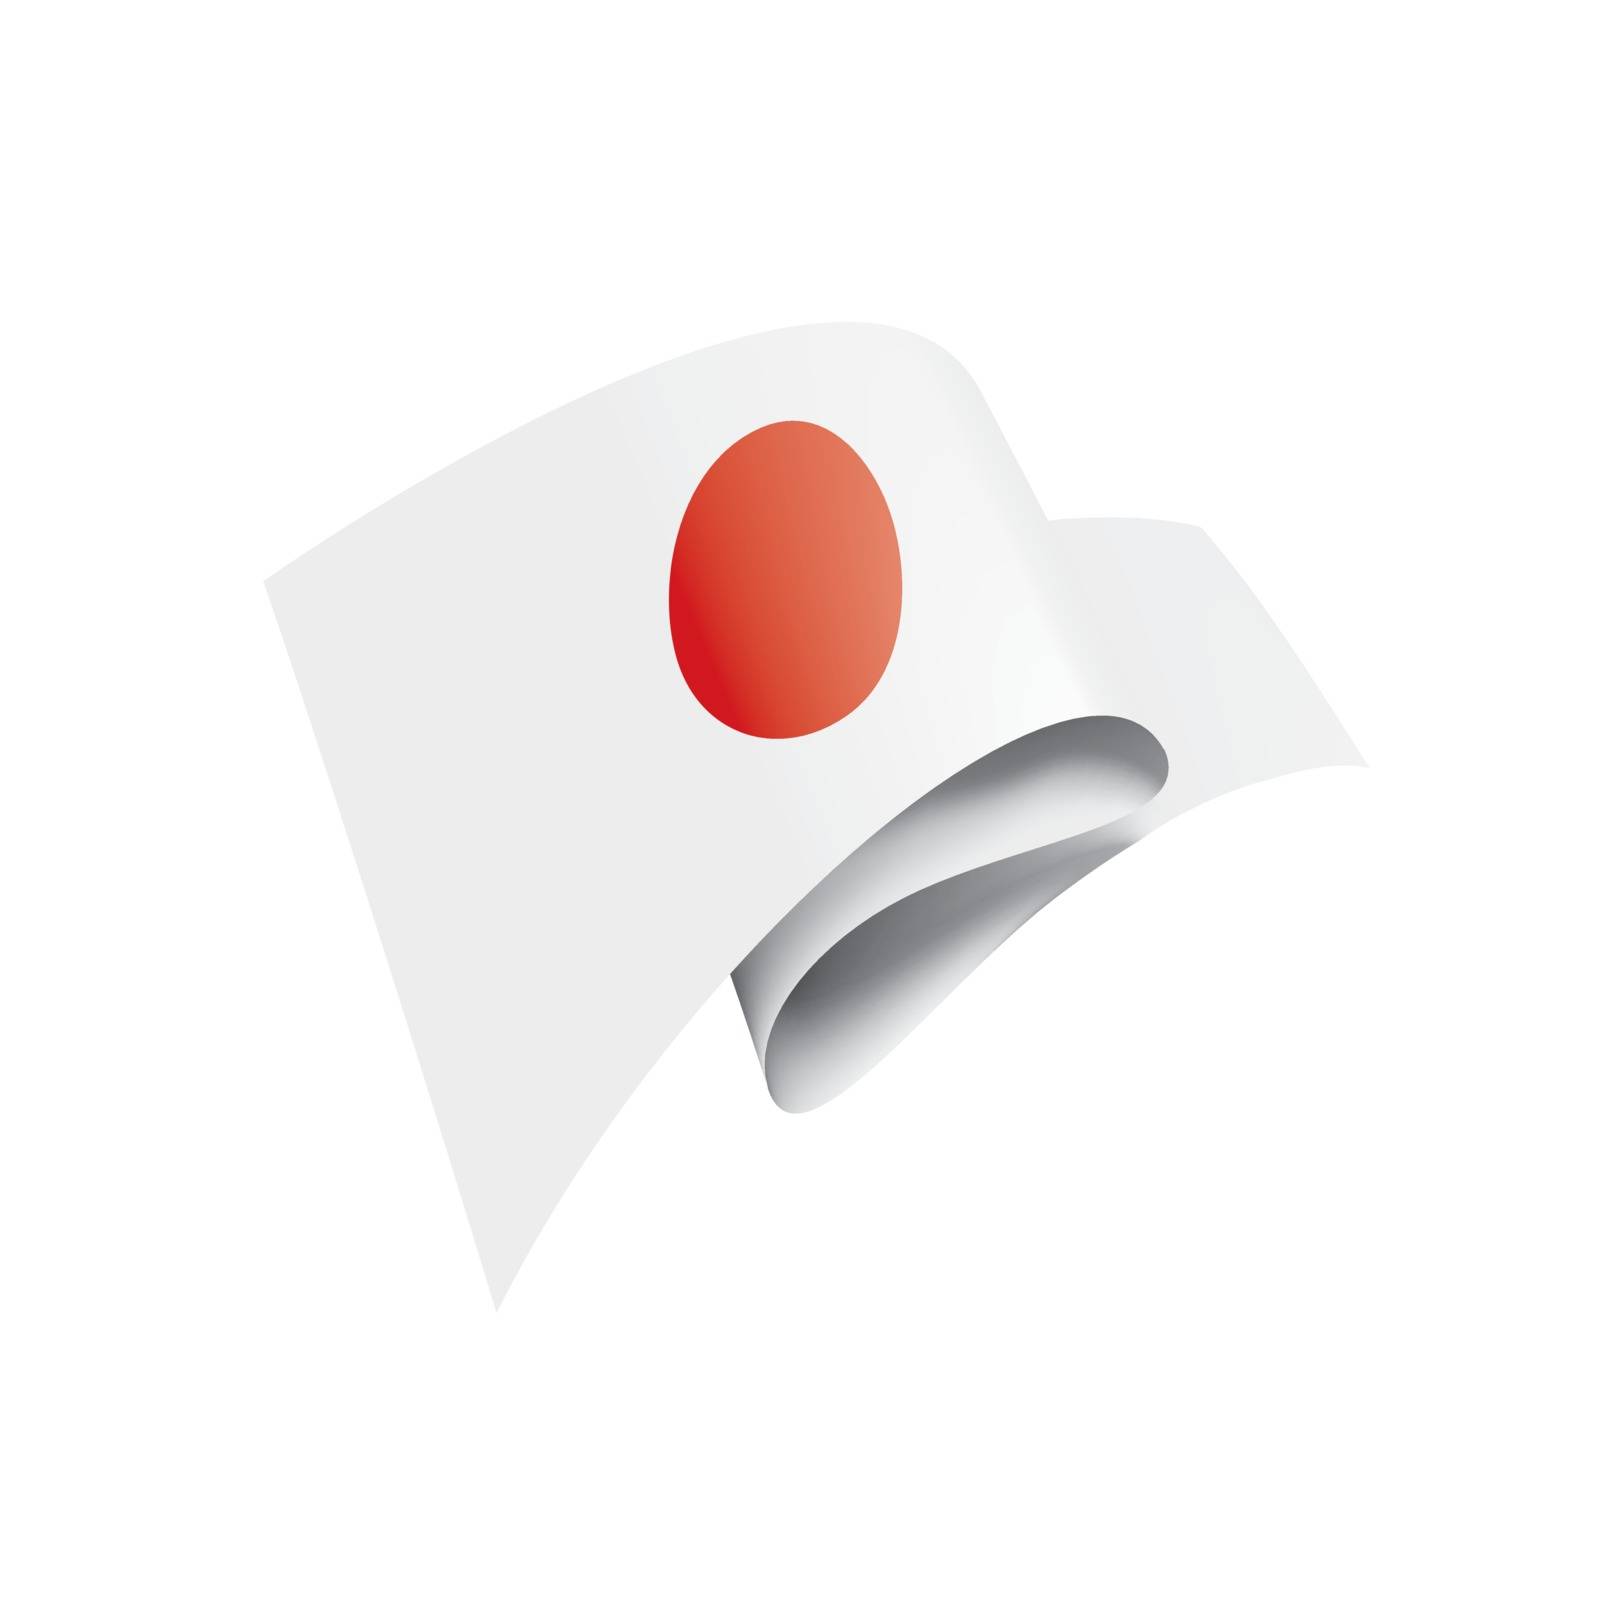 Japan flag, vector illustration on a white background by butenkow